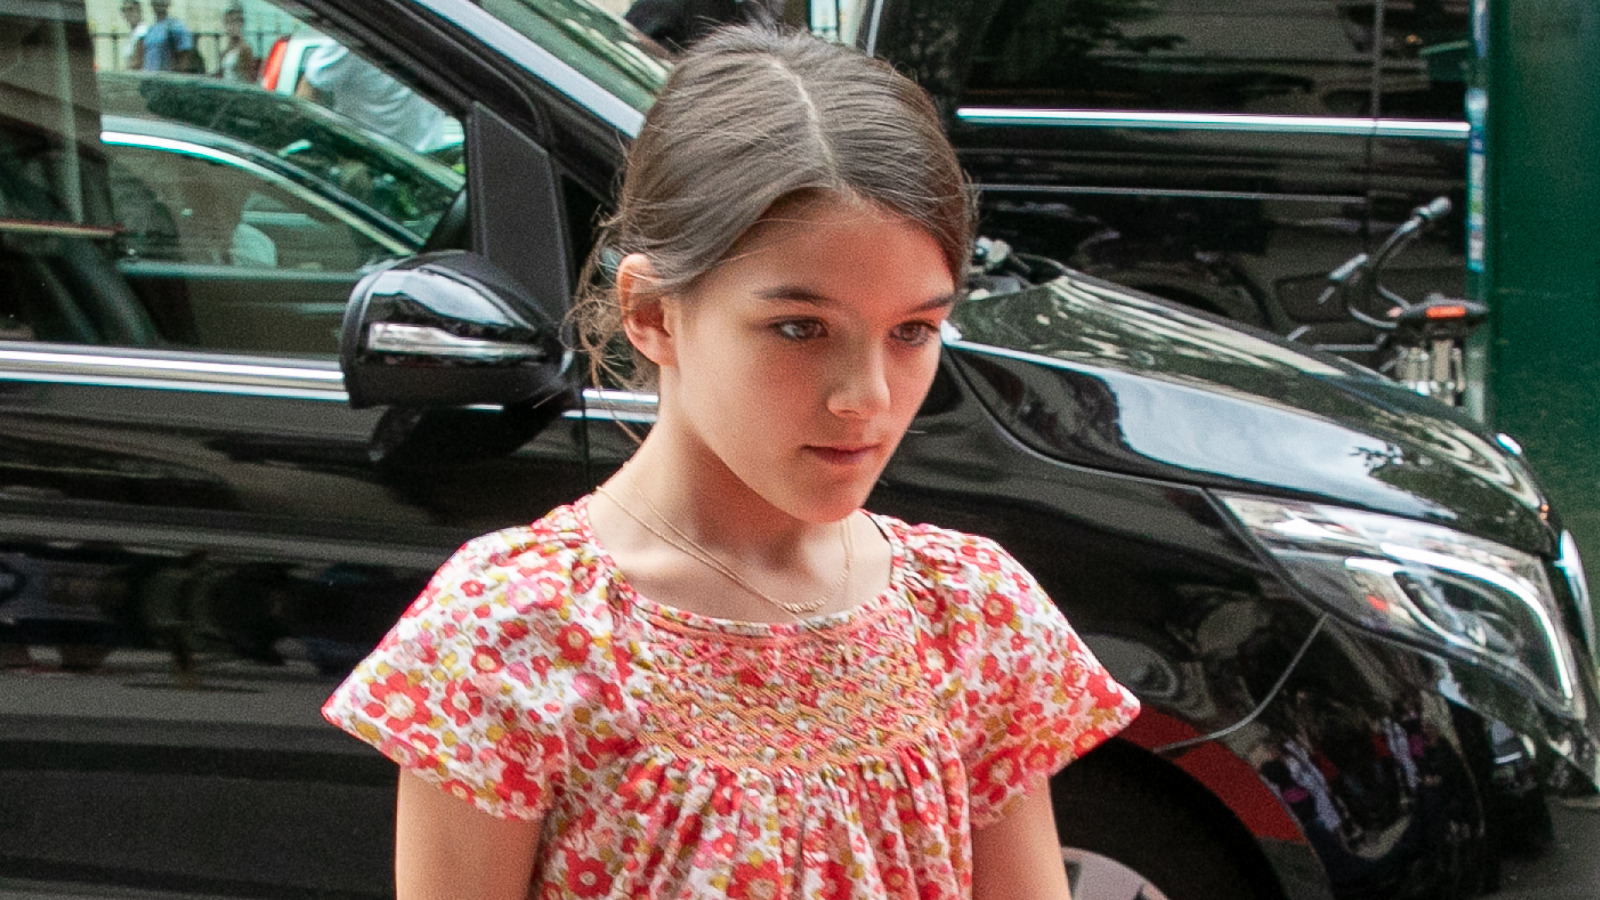 New Photo Of Suri Cruise Makes Clear She's Beating Dad Tom's Height